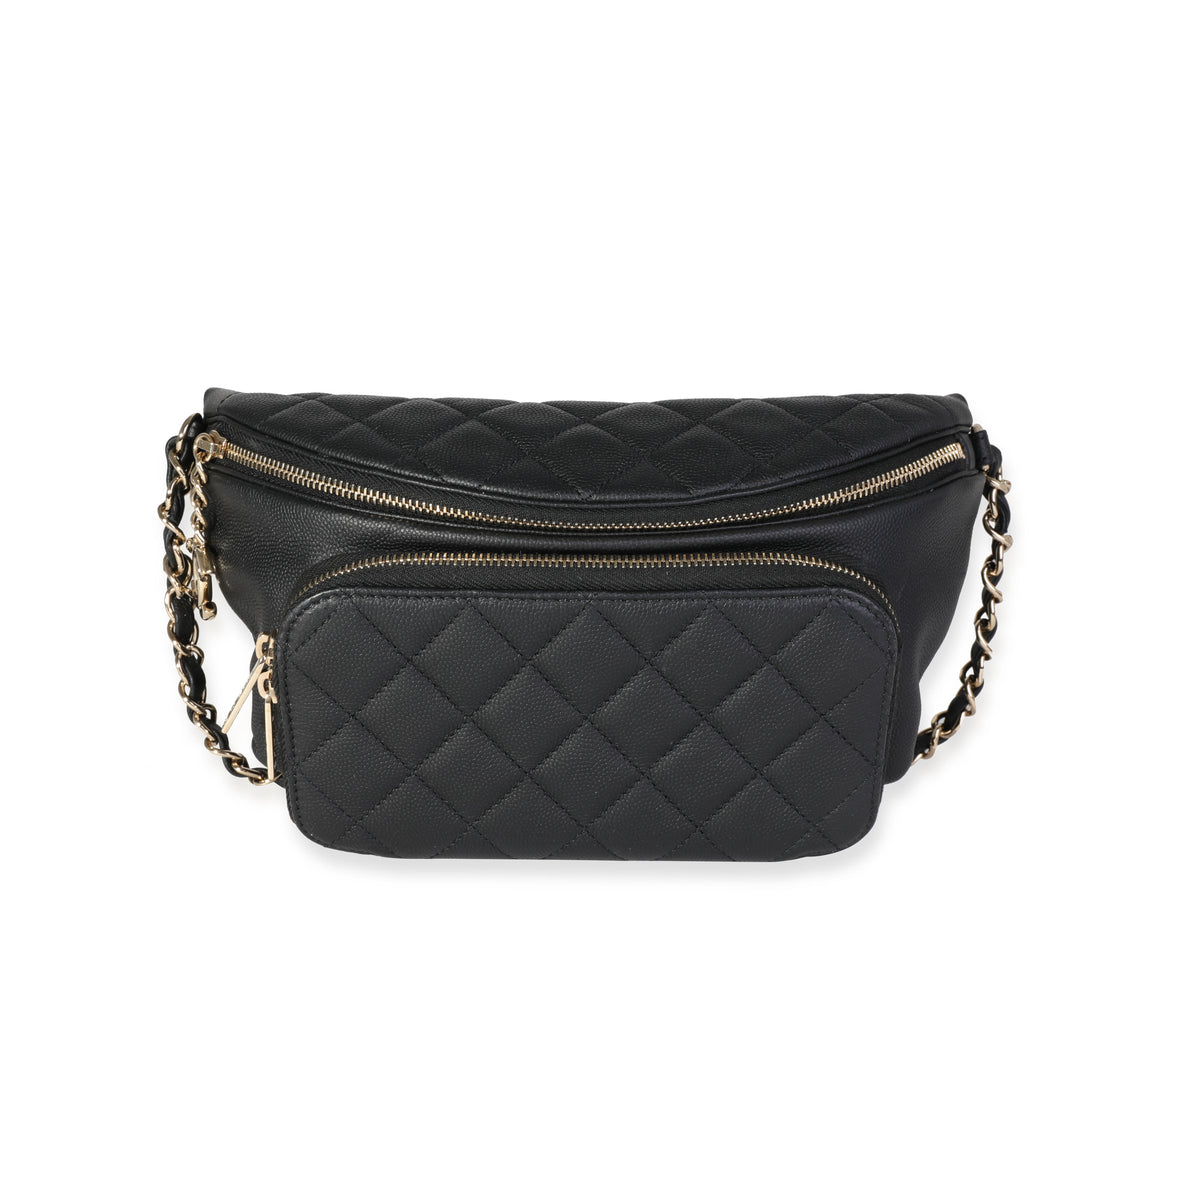 Chanel Black Quilted Caviar Leather Business Affinity Waist Belt Bag, myGemma